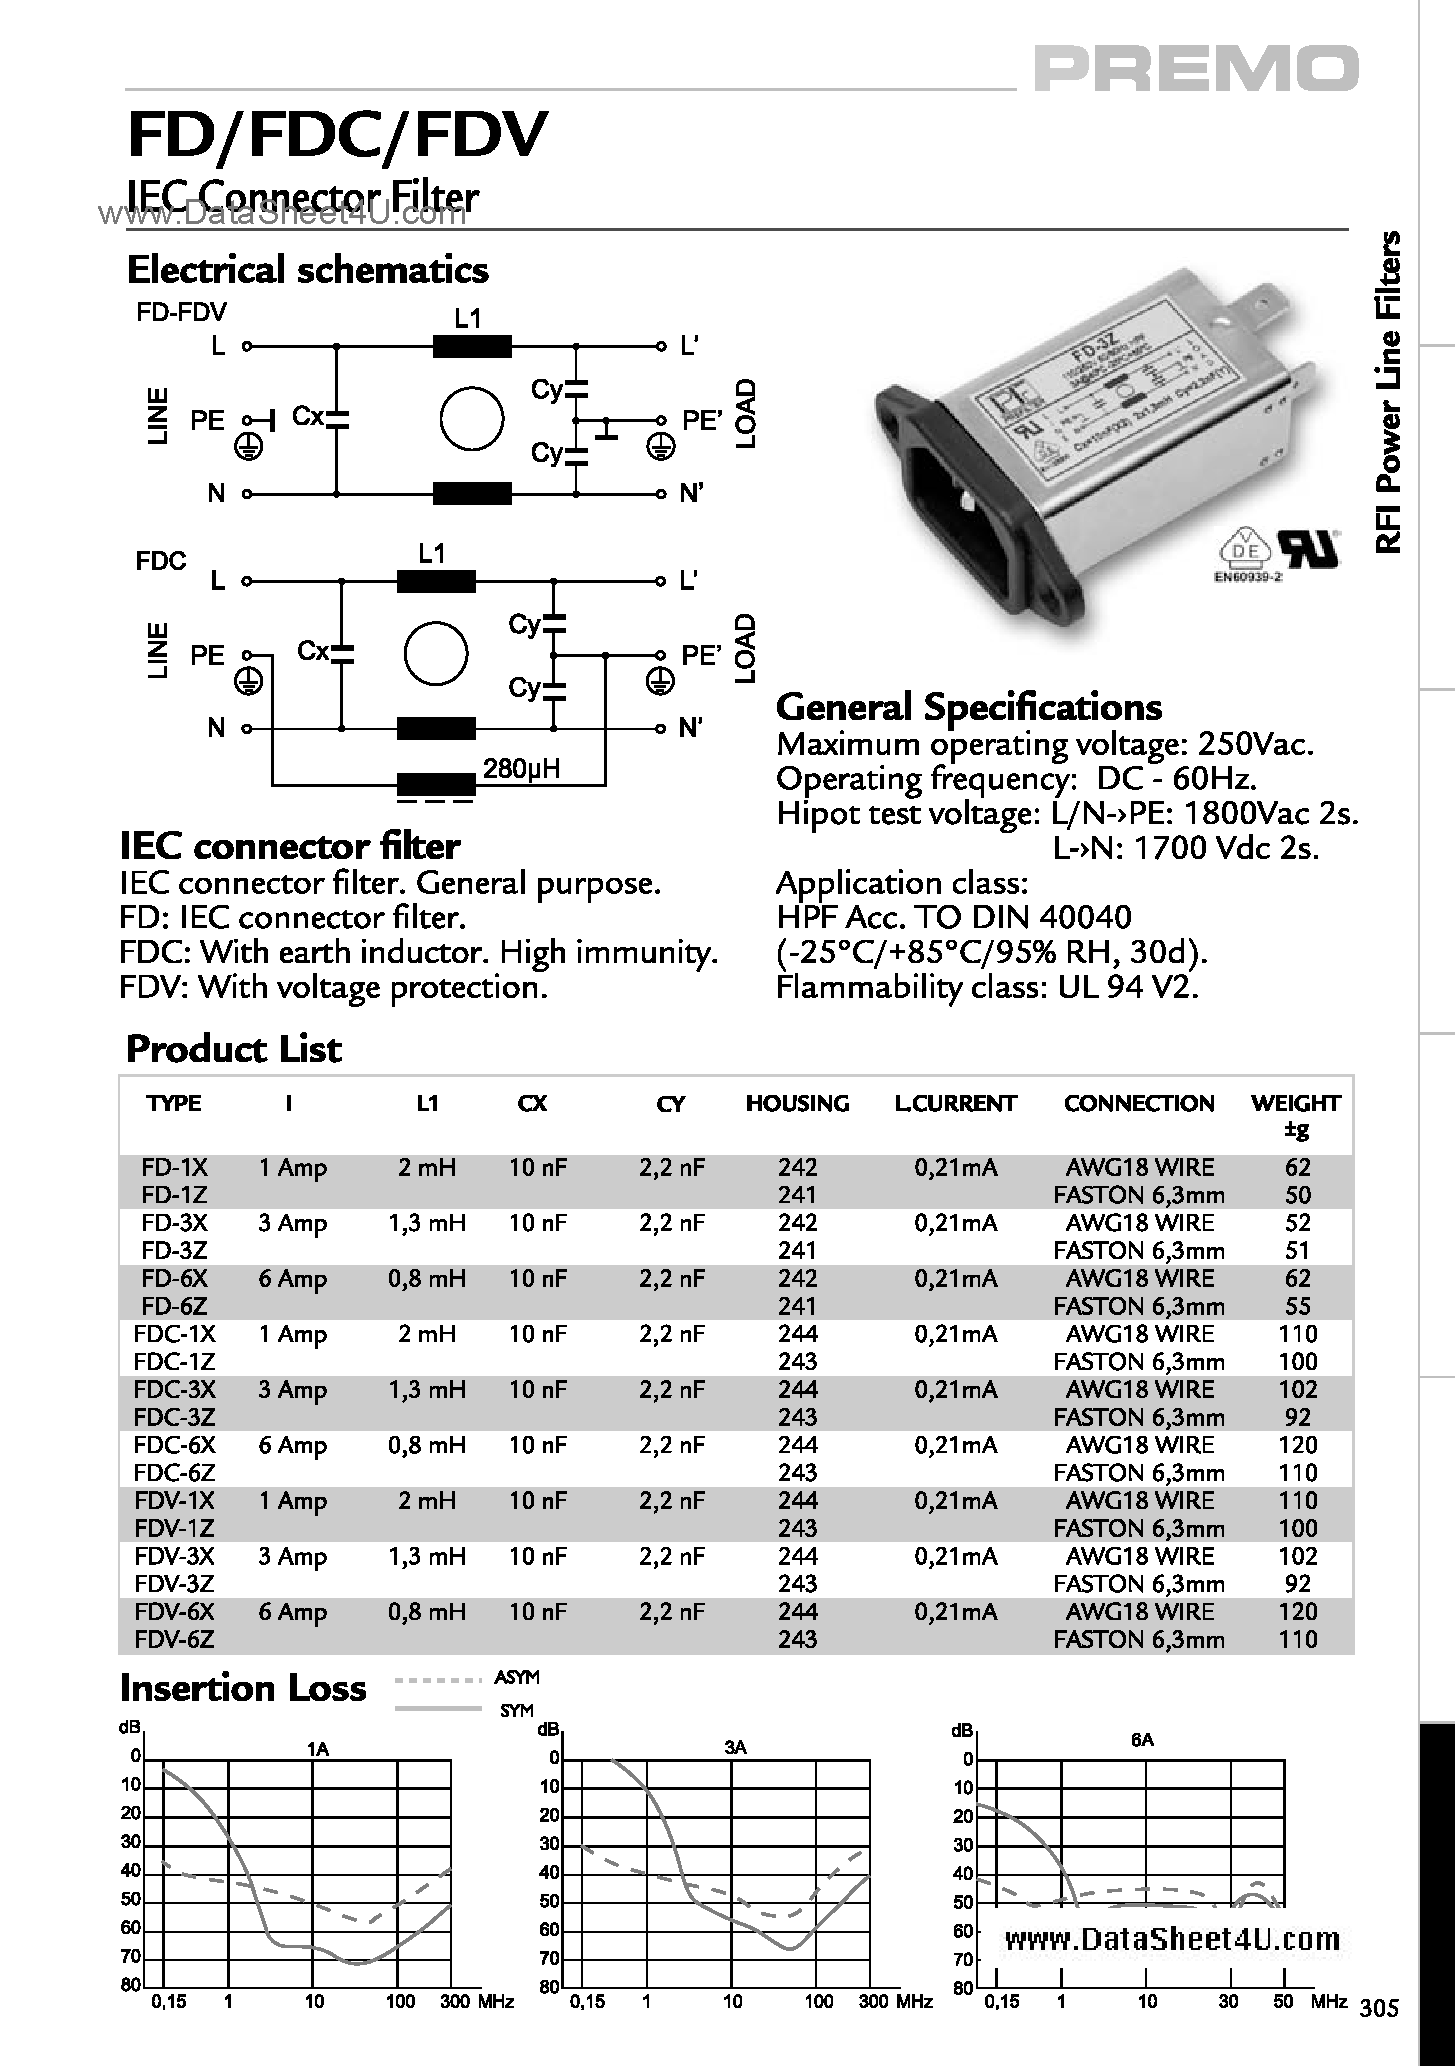 Даташит FDC-xx - EMC Filters - Single-Phase Filters - FD/FDC/FDV IEC Connector Filter страница 1